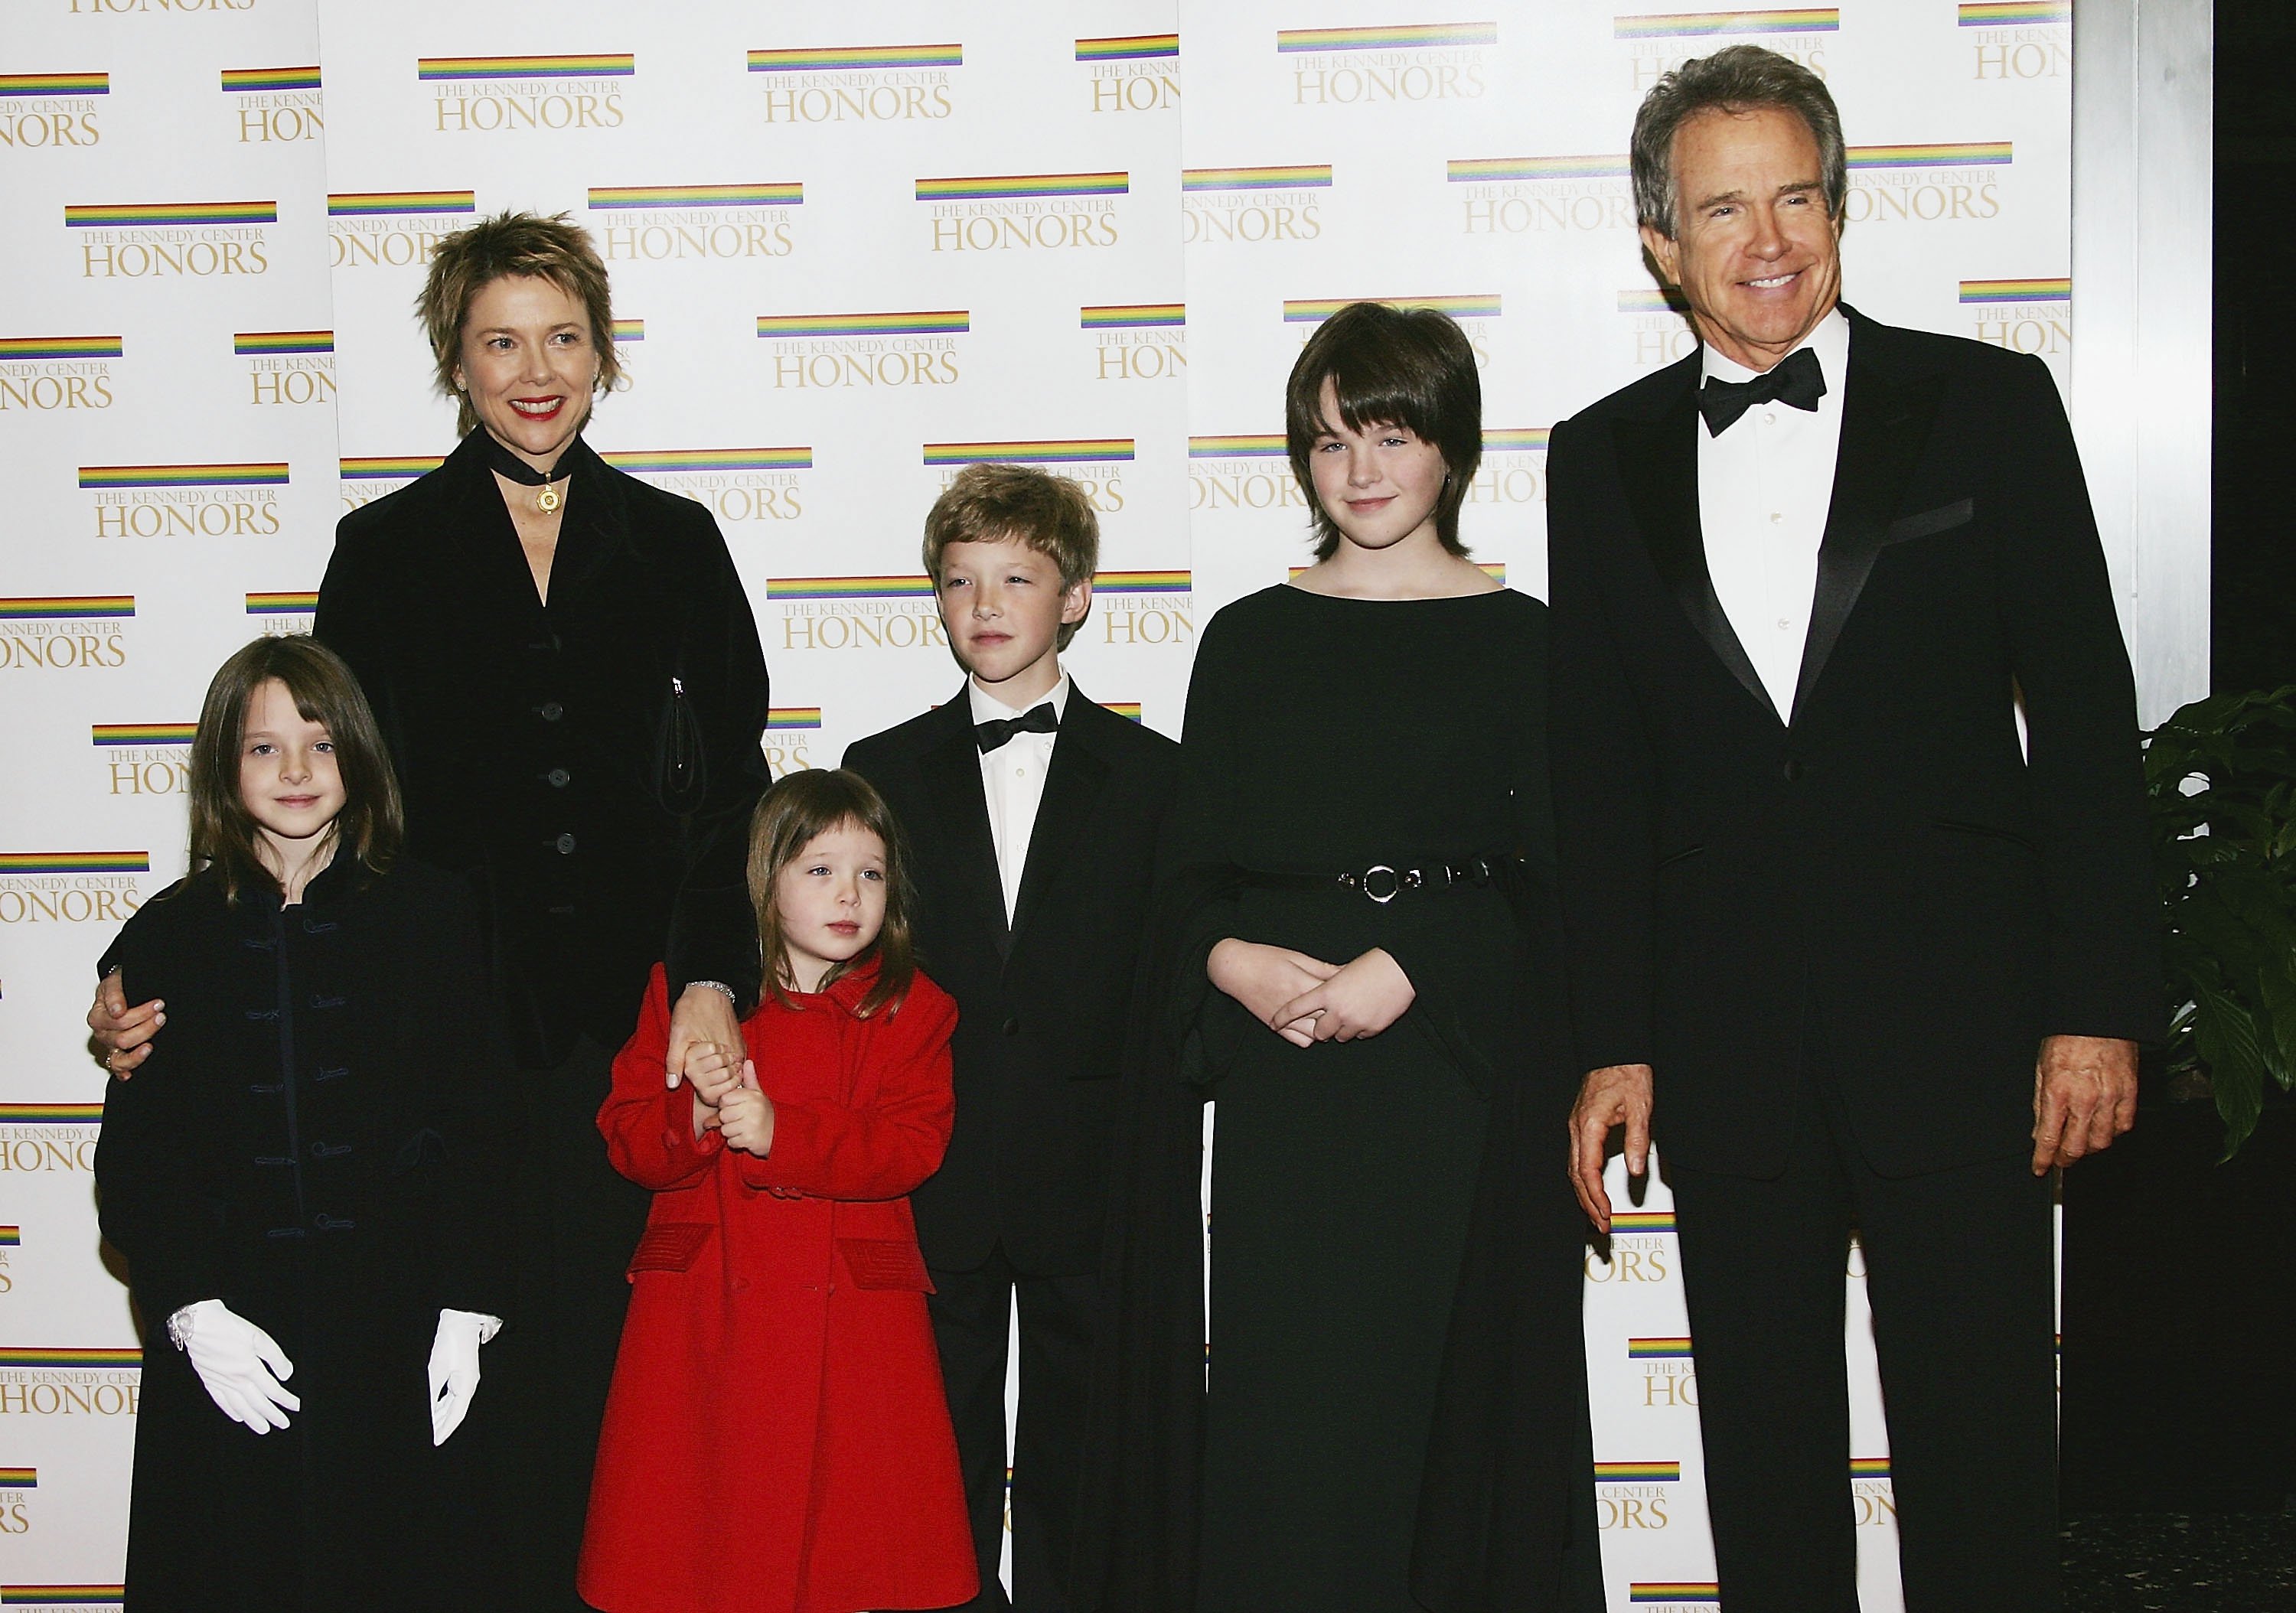 Warren Beatty poses with wife Annette Bening and children Isabel, Ella, Benjamin and Kathlyn at the 27th Annual Kennedy Center Honors at U.S. Department of State, December 4, 2004, in Washington, DC. | Photo: Getty Images